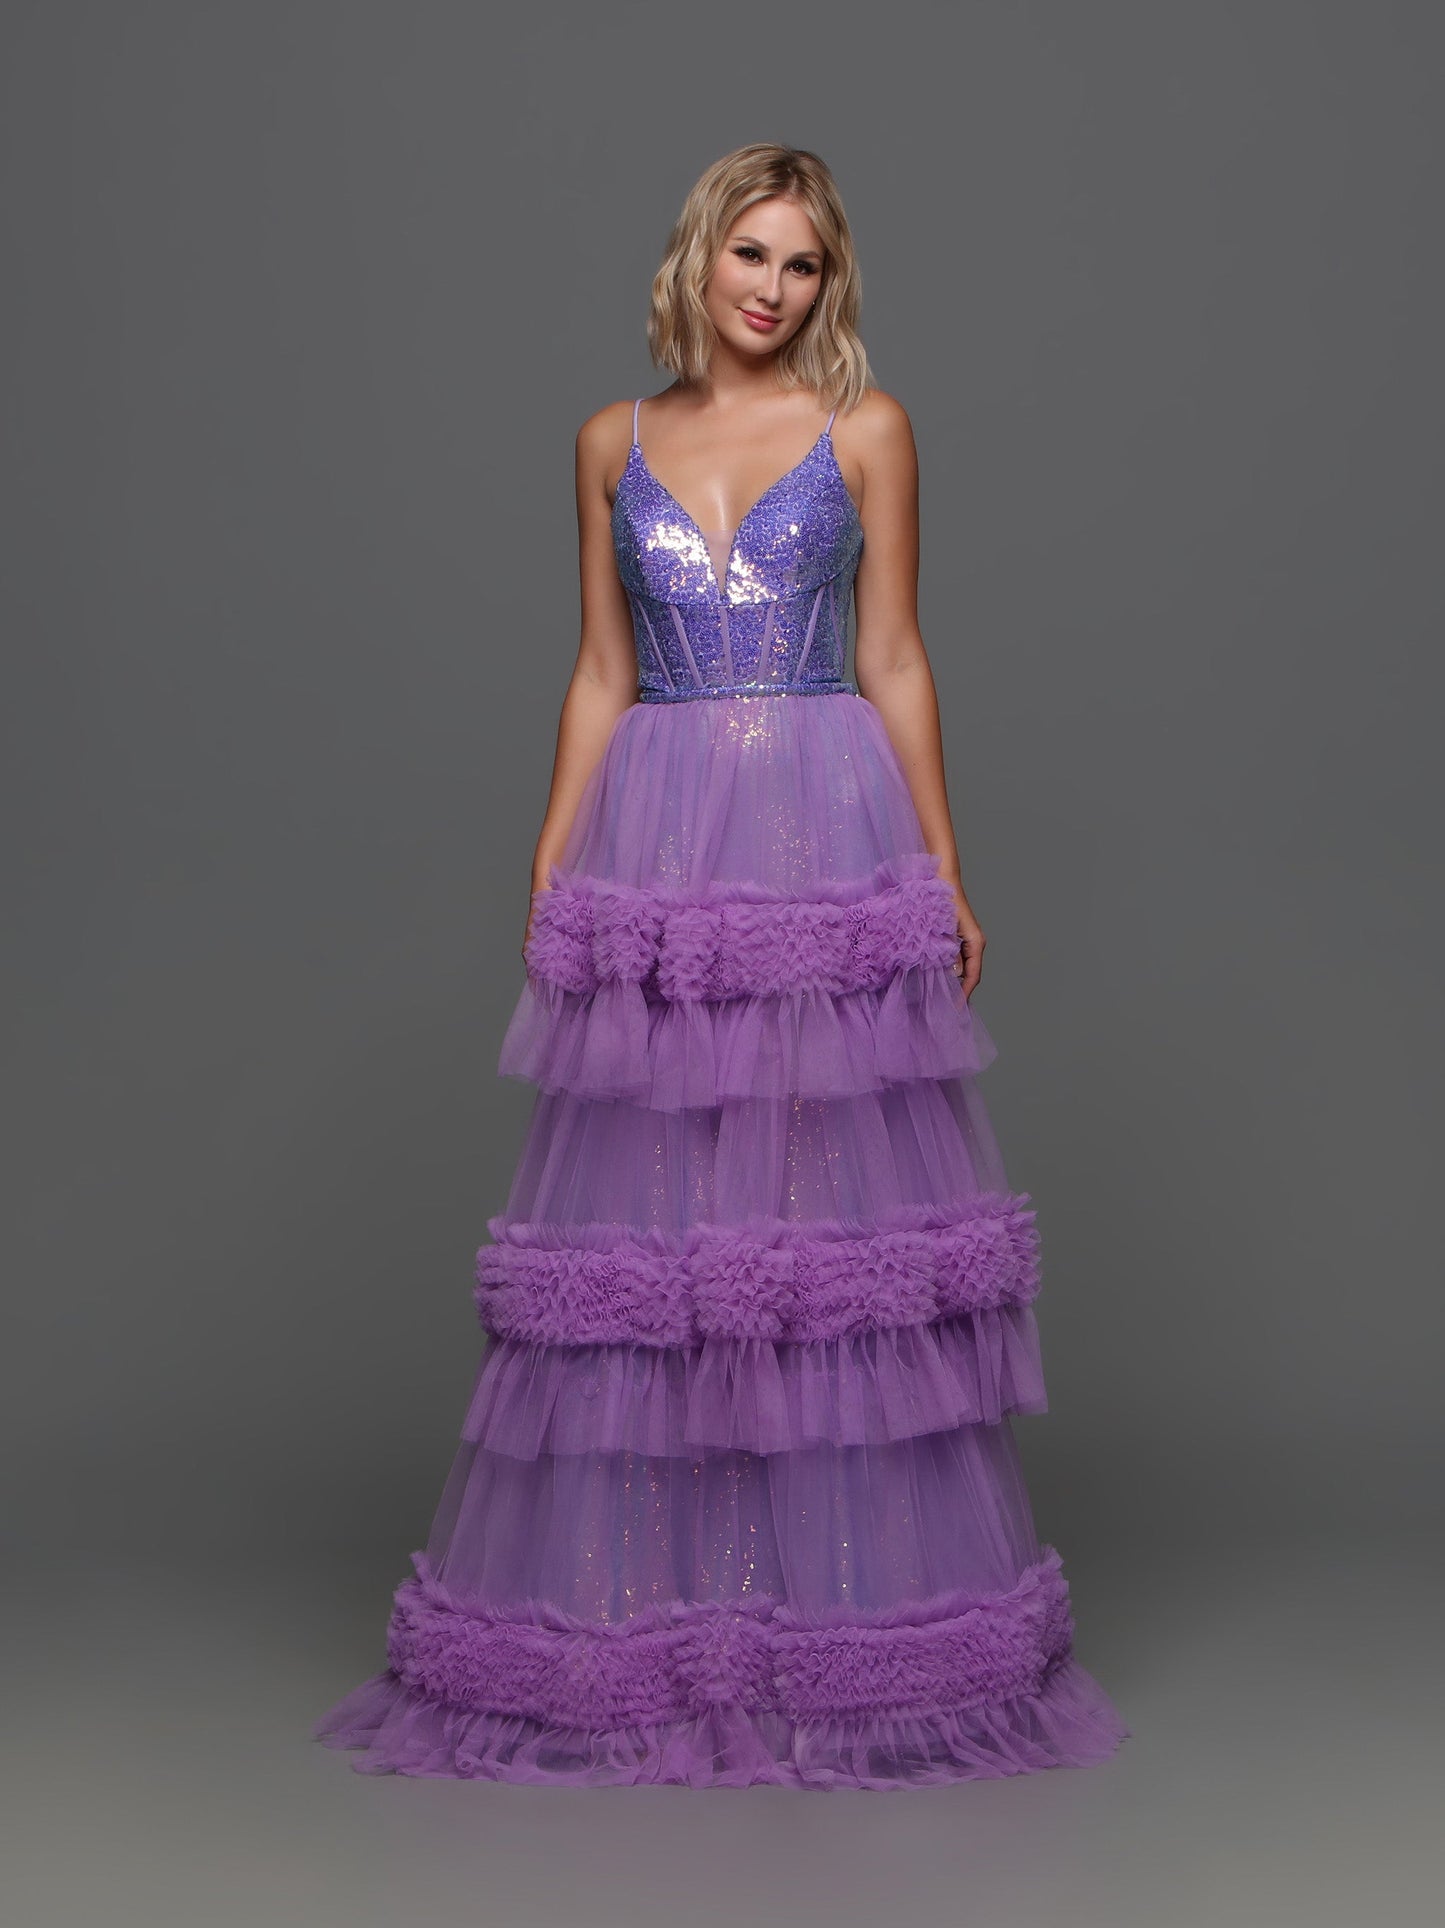 The Candice Wang 72377 Sequin V Neck Prom Dress features a fitted sequin silhouette with a stunning sequin V-neck corset bodice. The Detachable pleated tulle skirt adds layers for a full and luxurious look. Perfect for prom or any special occasion.  Sizes: 0-20  Colors: Purple, Pink